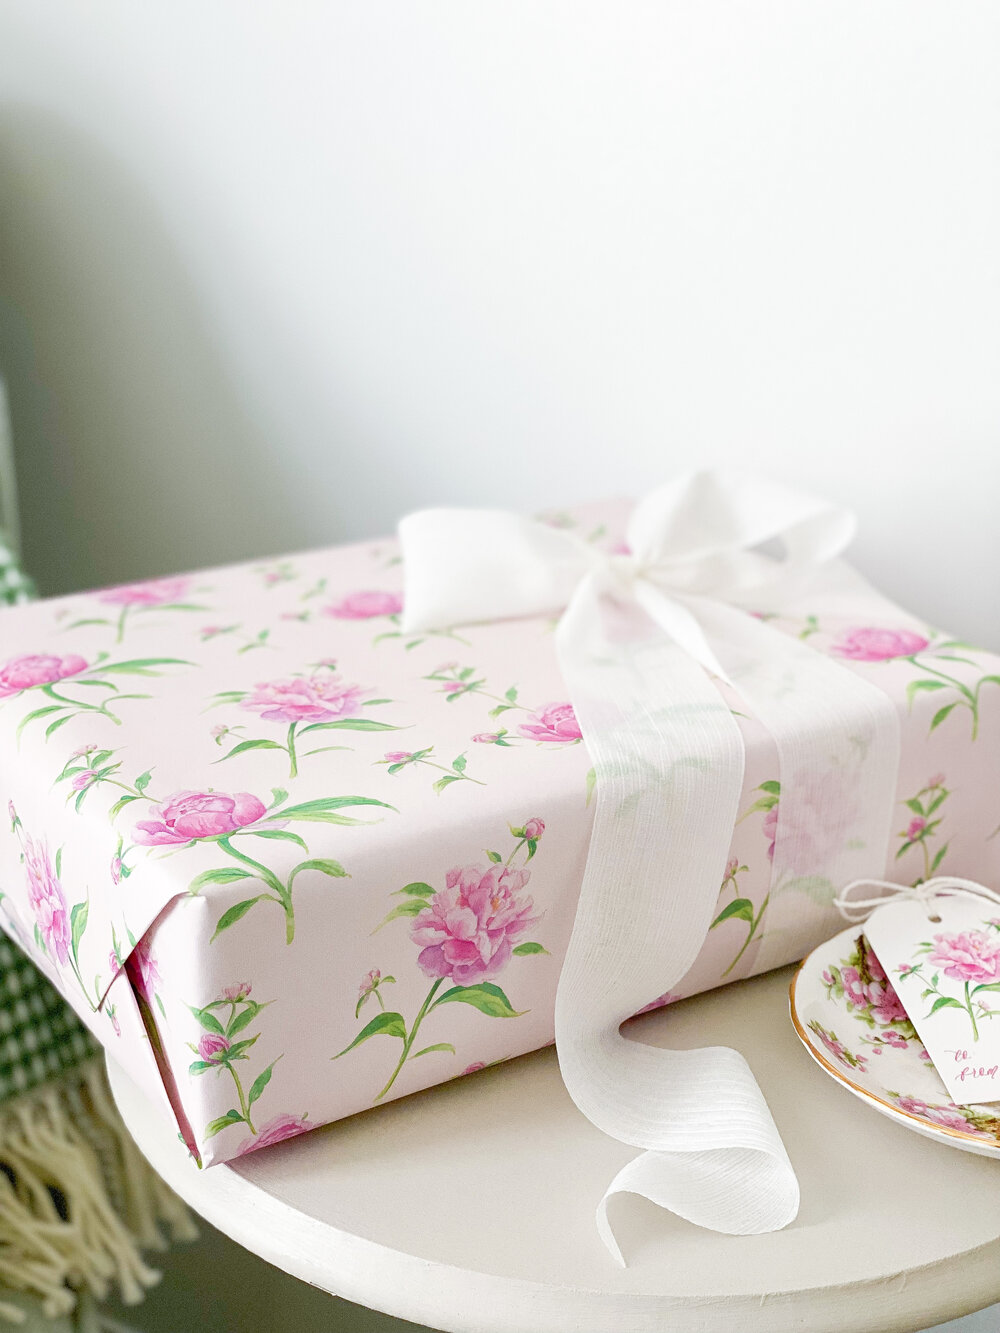 Peony Floral Wrapping Paper for Mother's Day Gifts Bouquets, 19.7 x 22.8  Inch - 15 Sheets